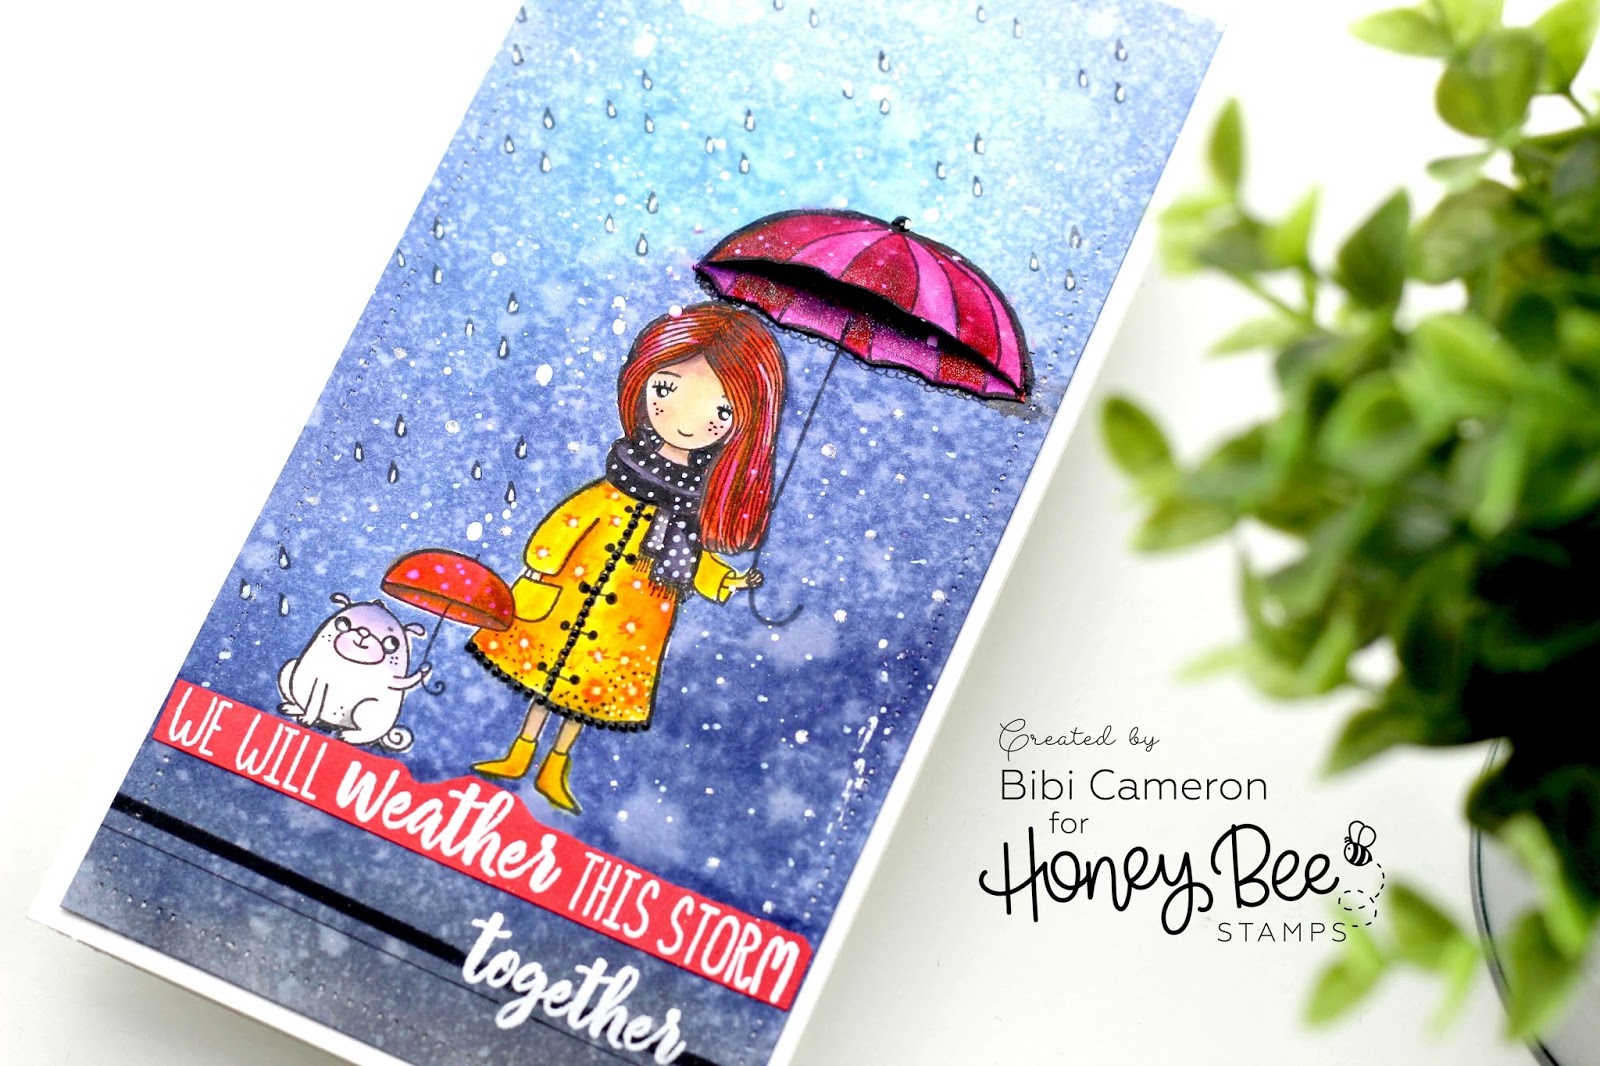 We will weather this storm together | Seasonal Sweeties by Honey Bee Stamps